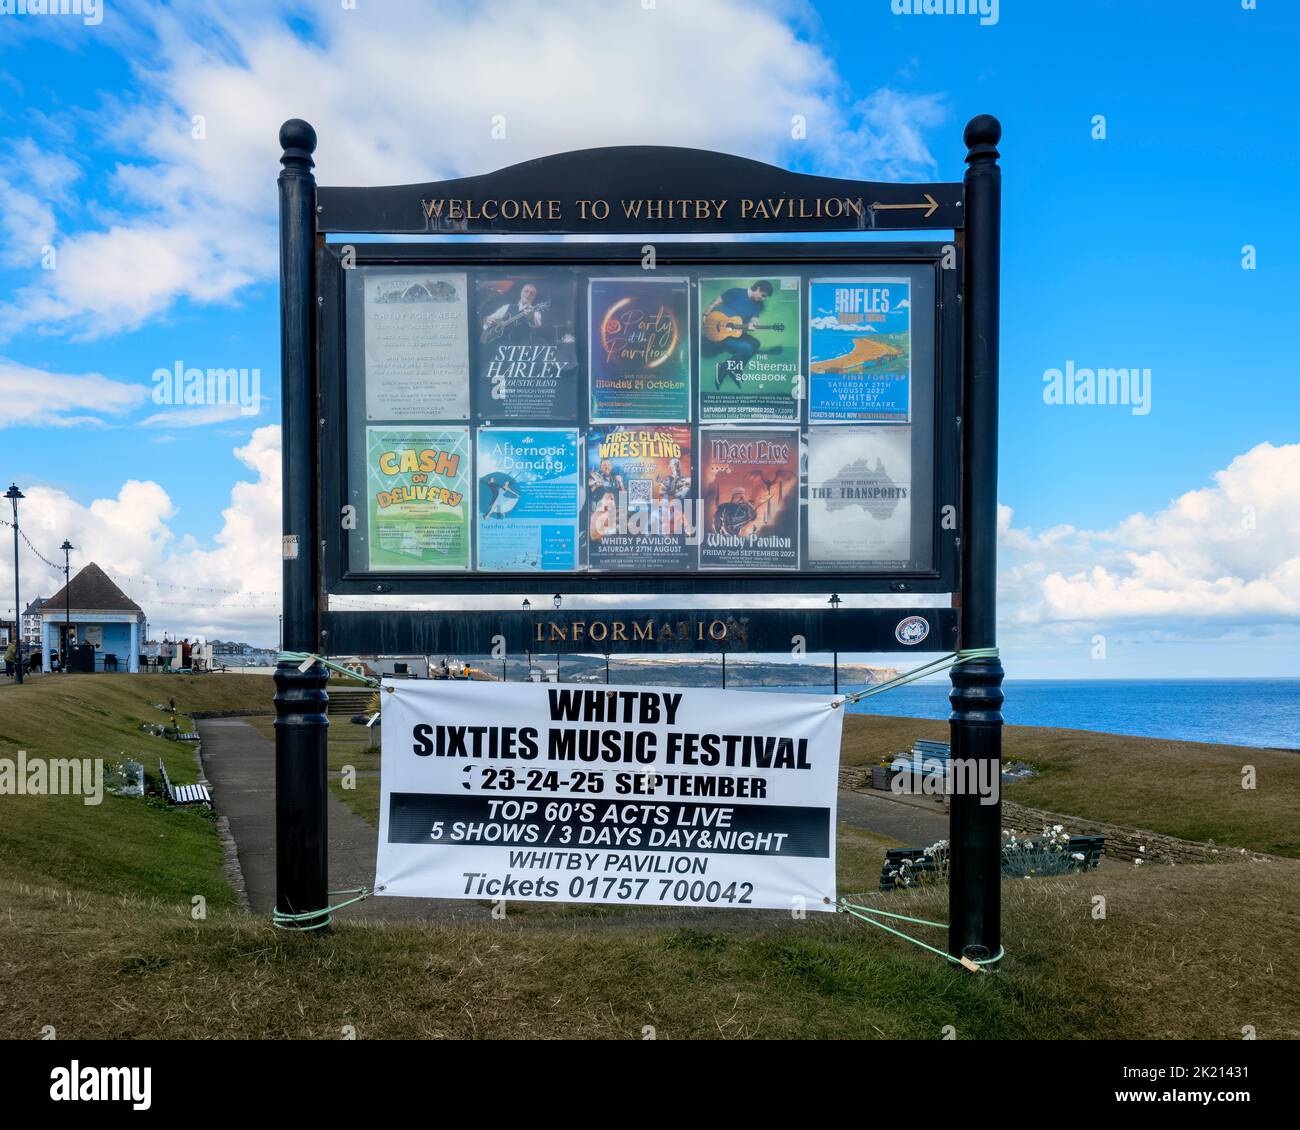 A Whitby Pavilion Information Board showing upcoming events, including a Sixties Music Festival. Stock Photo